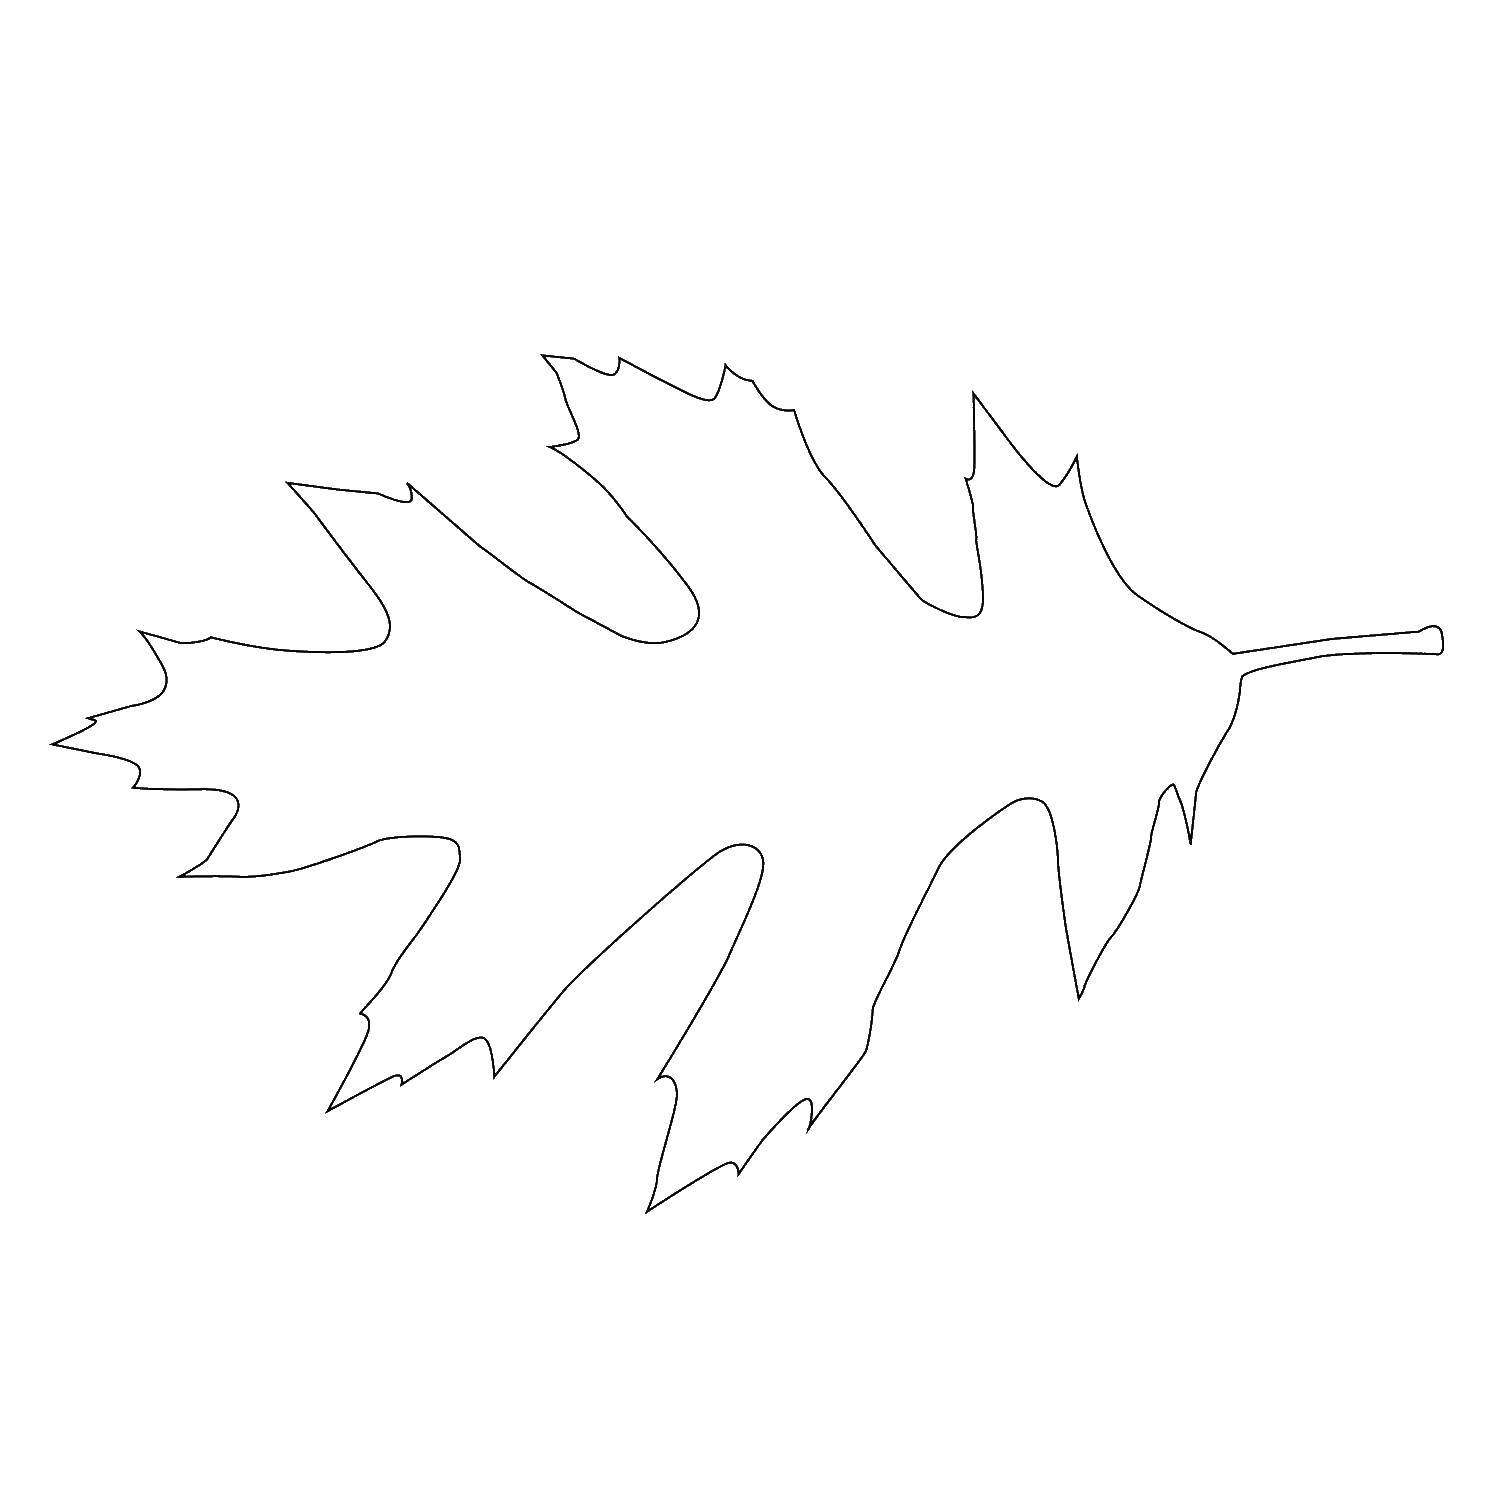 Coloring Sheet. Category The contours of the leaves of the trees. Tags:  leaf.